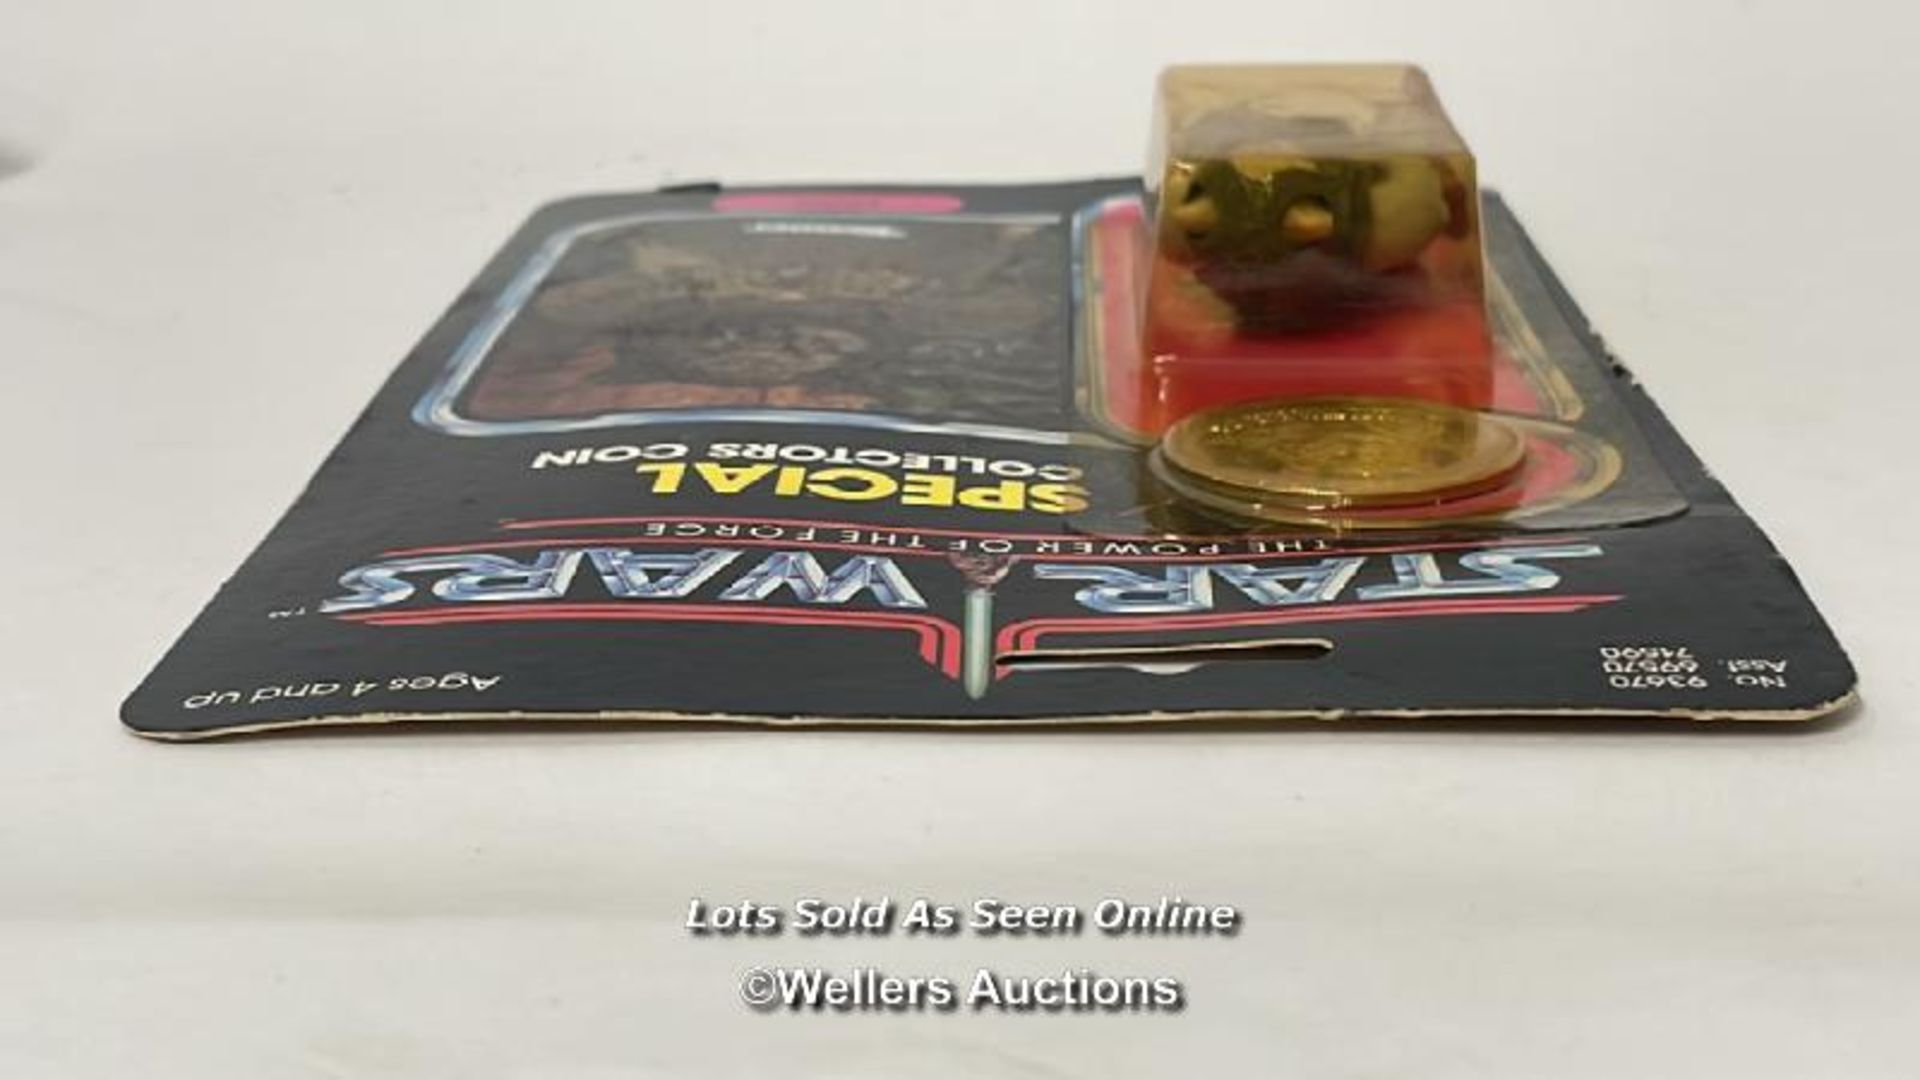 Star Wars vintage Lumat 3 3/4" figure, Power of the Force 92 back with collectors coin, Kenner 1984, - Image 8 of 11